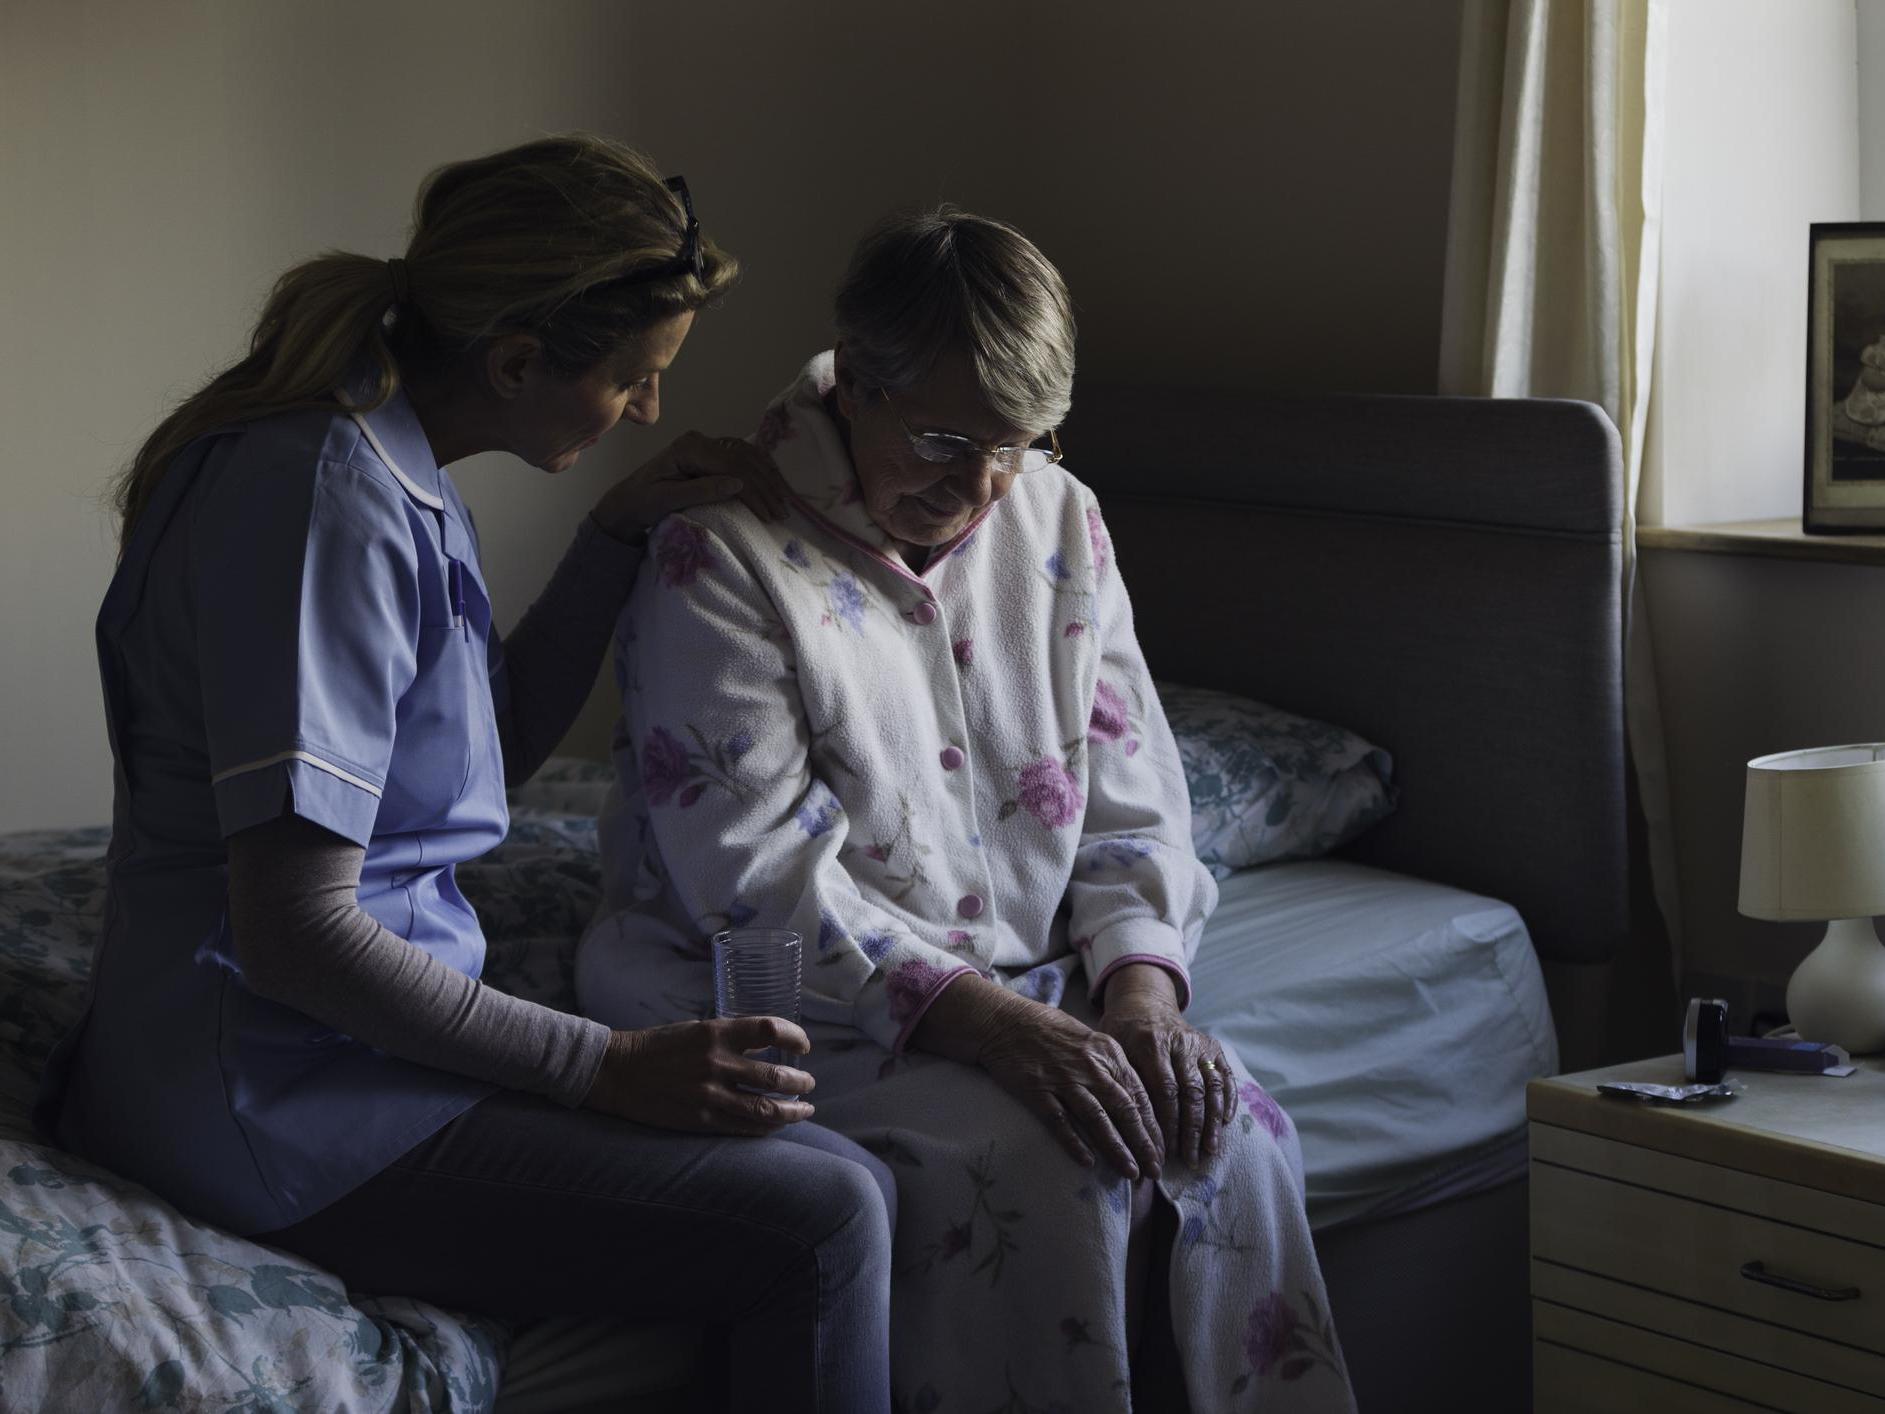 Experts say elderly social care is significantly underfunded